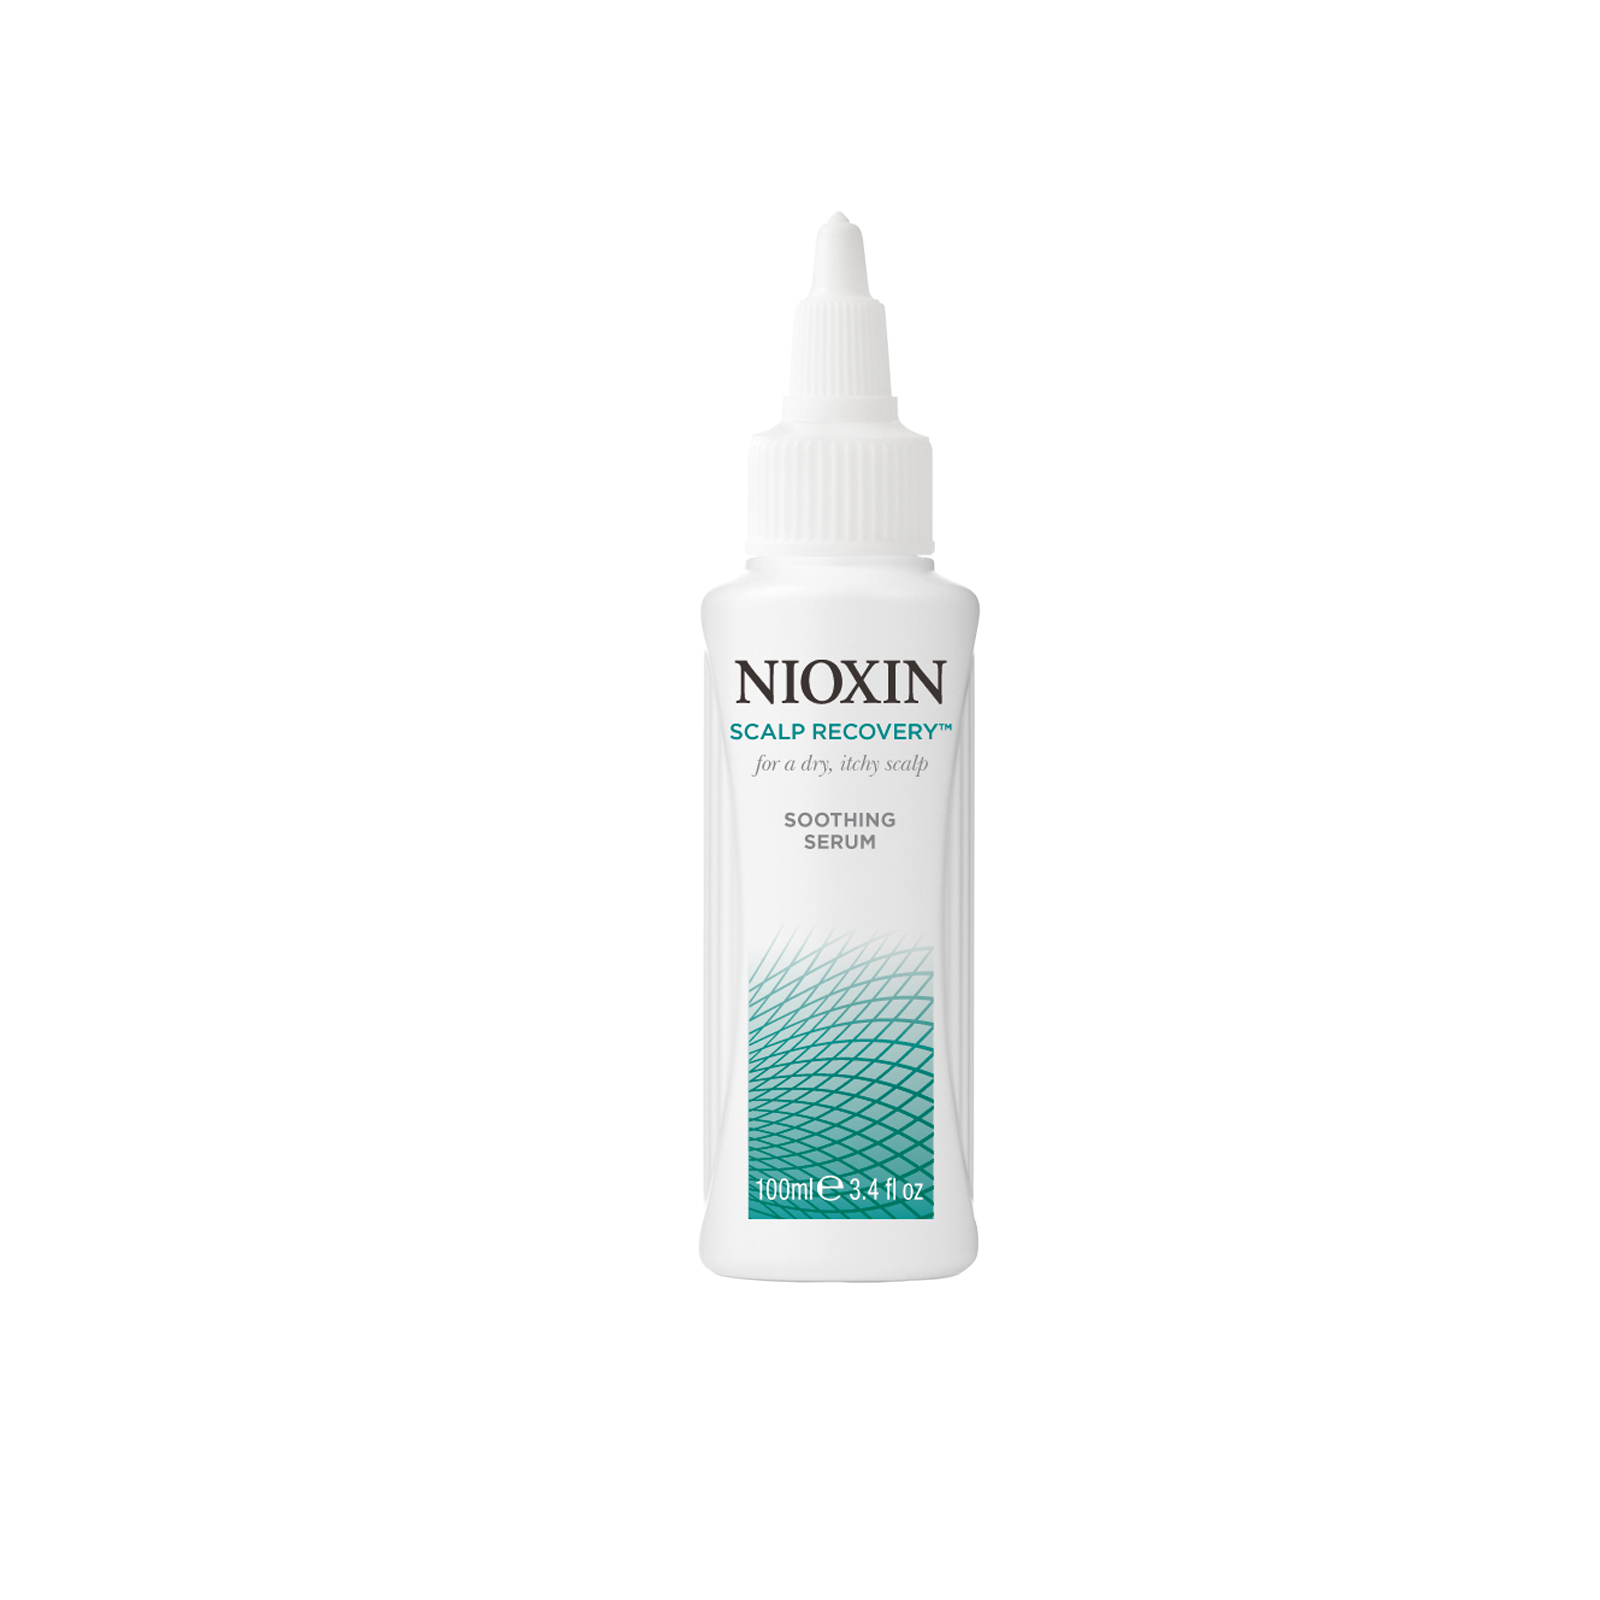 What retailers carry nioxin products?